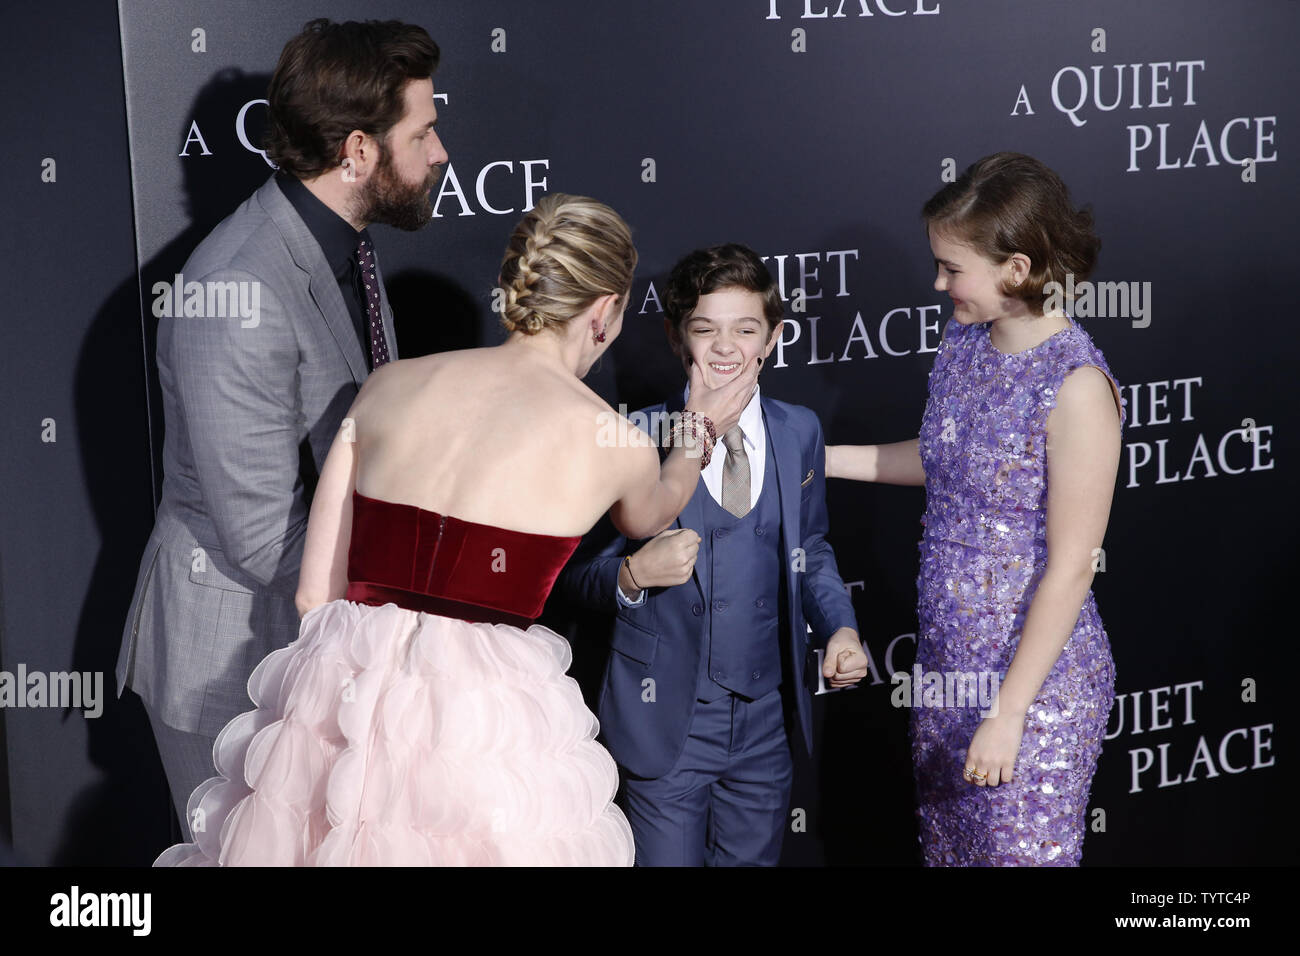 John Krasinski, Noah Jupe, Millicent Simmonds and Emily Blunt arrive on the  red carpet at the premiere for 'A Quiet Place' at AMC Lincoln Square  Theater on April 2, 2018 in New